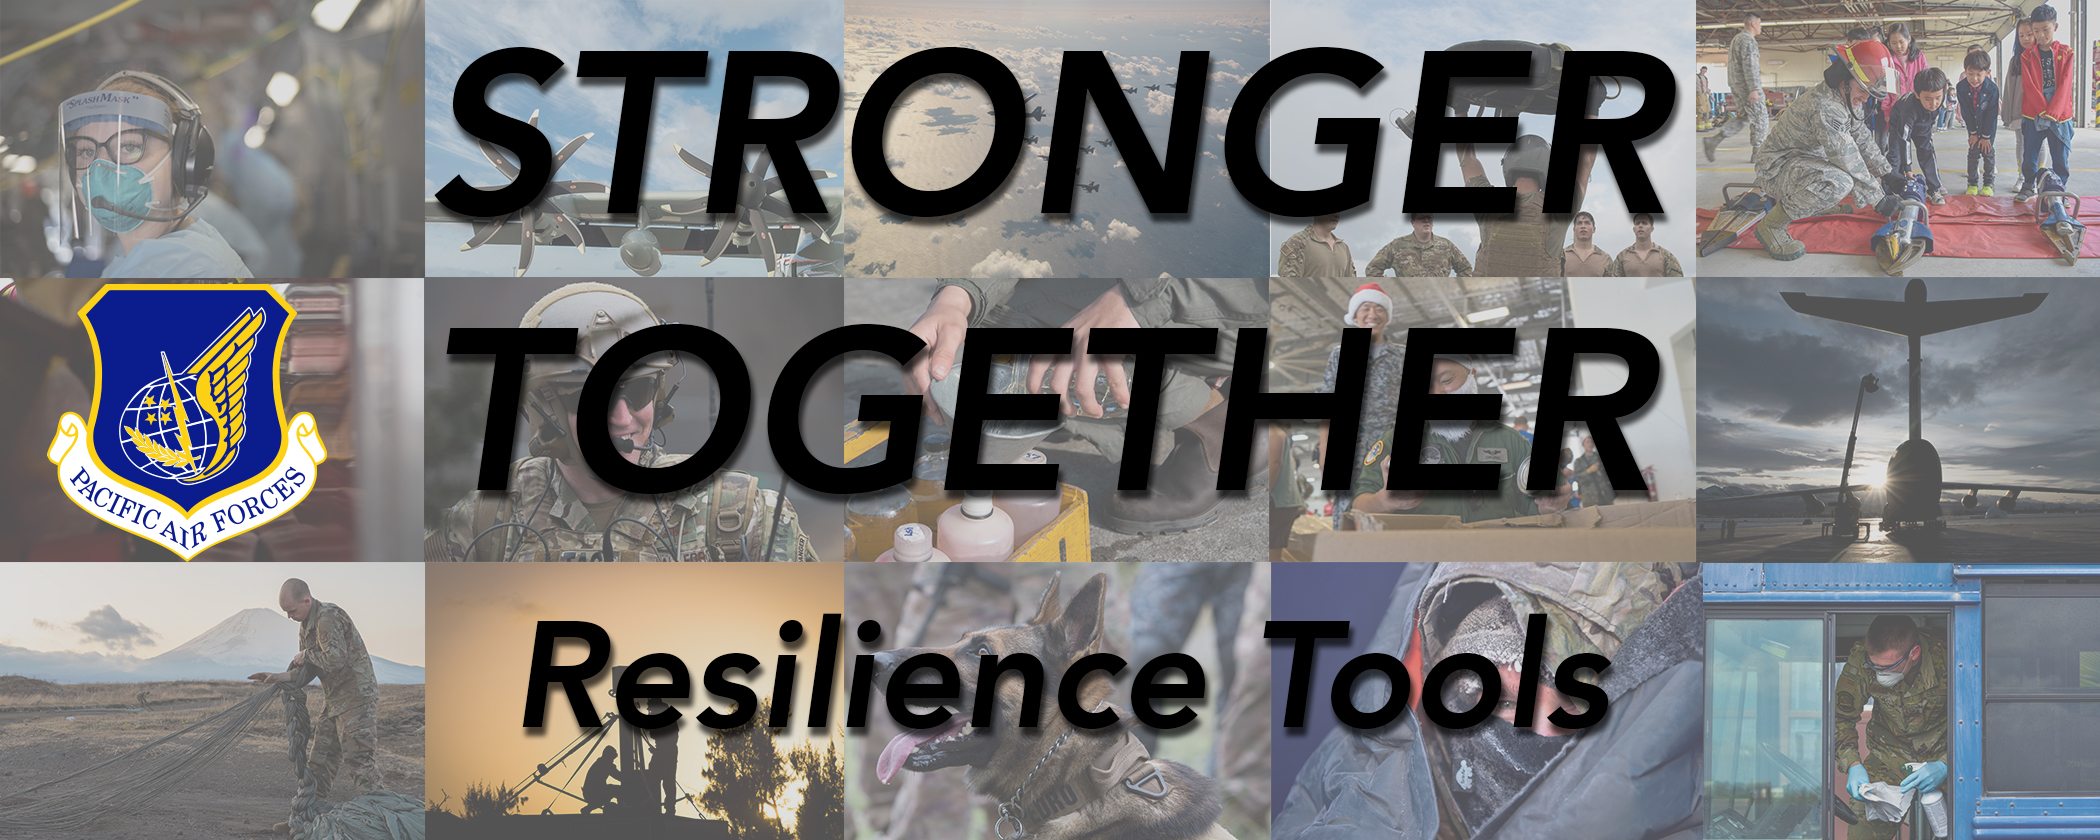 Resilience Tools Webpage